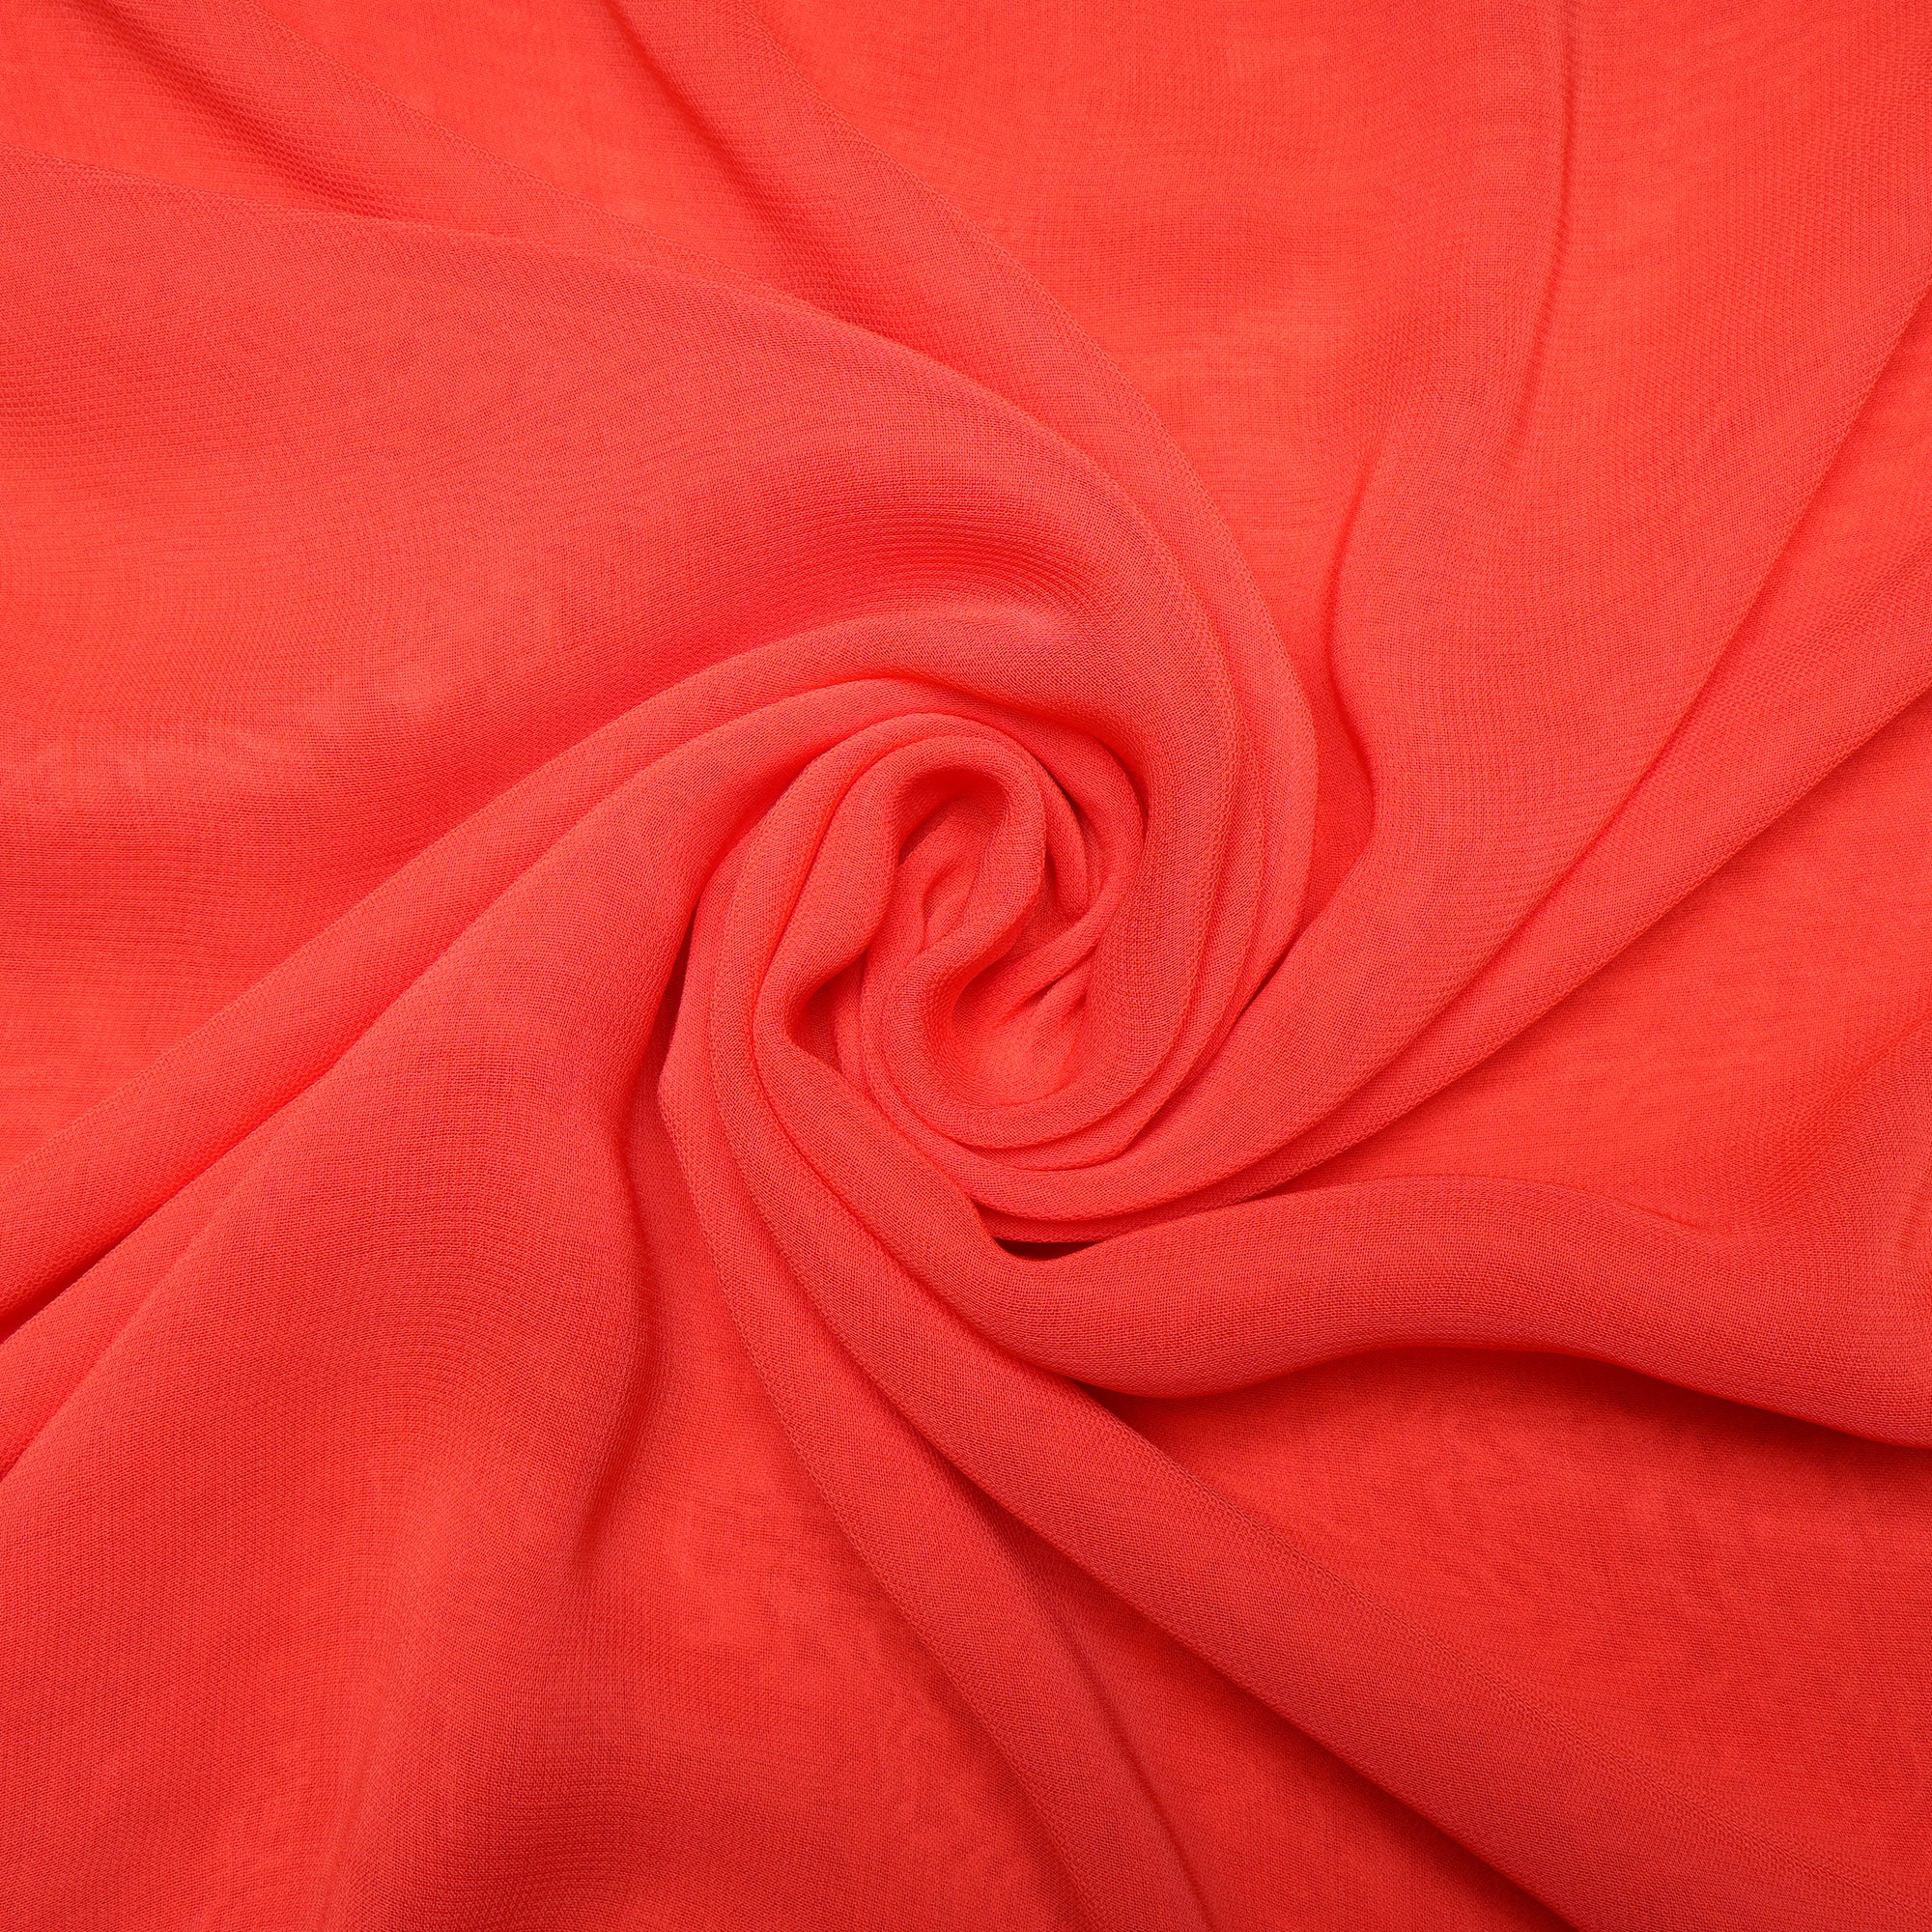 Tomato Color Piece Dyed Viscose Georgette Fabric